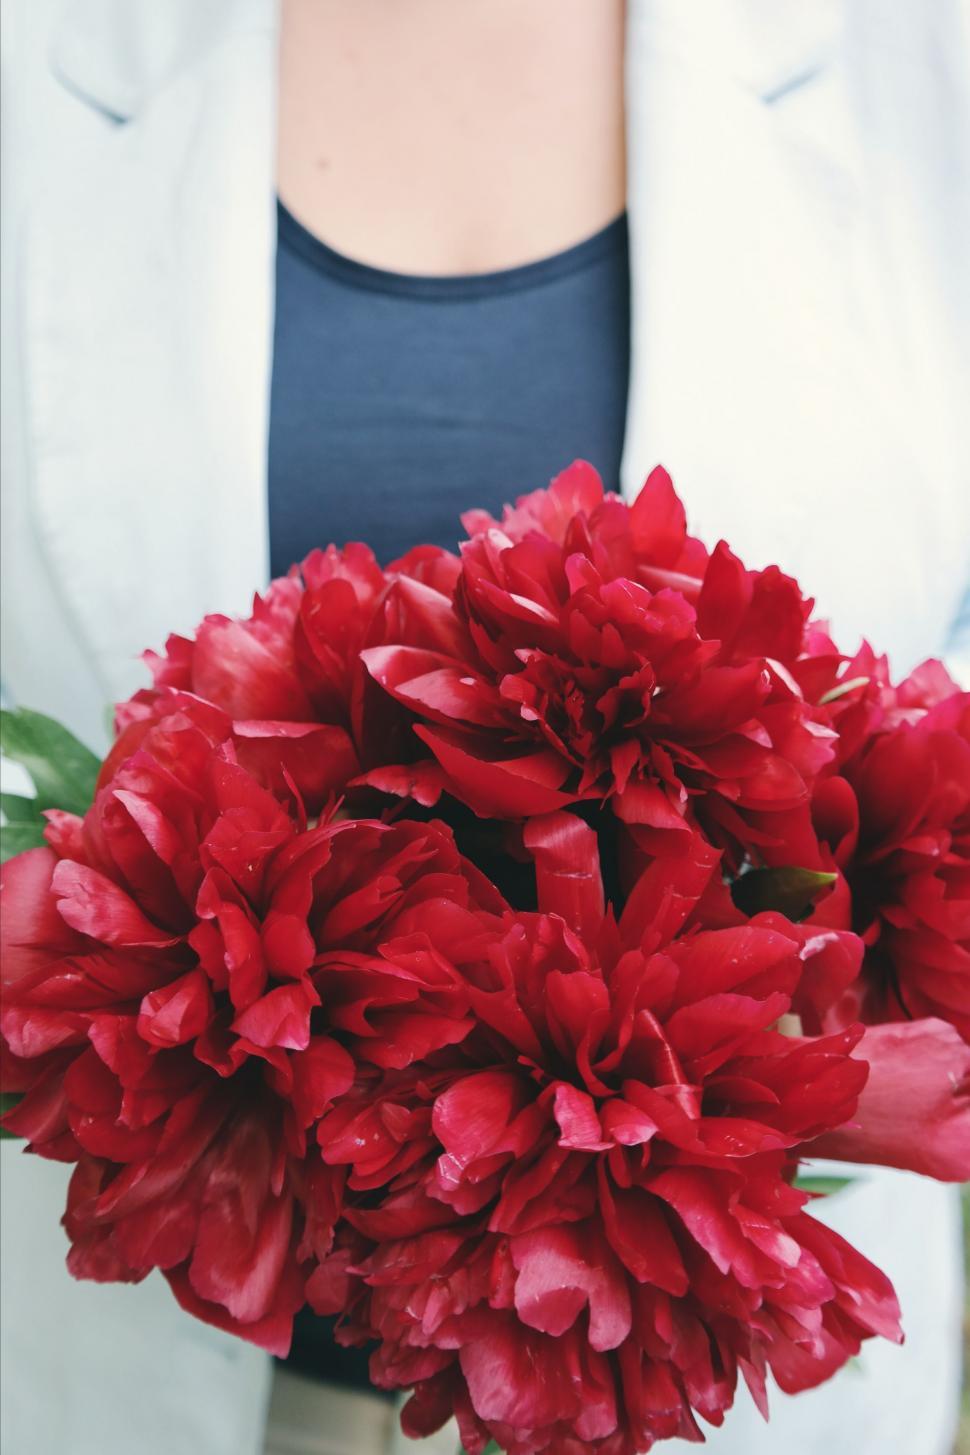 Free Image of Woman Holding Bouquet of Red Flowers 